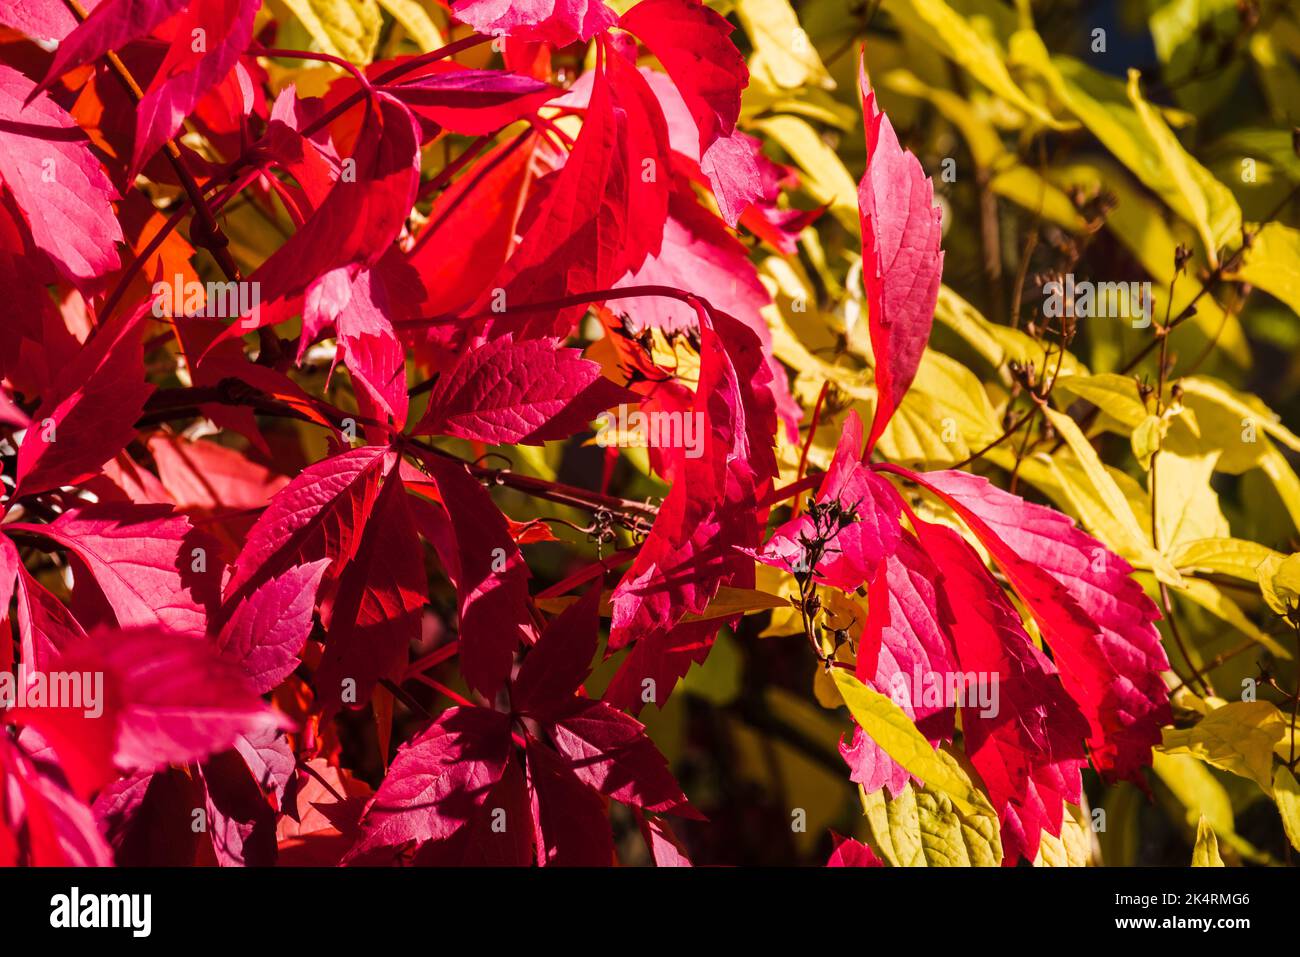 Bright colorful autumn background with red and yellow leaves of Parthenocissus quinquefolia, decorative climbing plant of the grape family Stock Photo